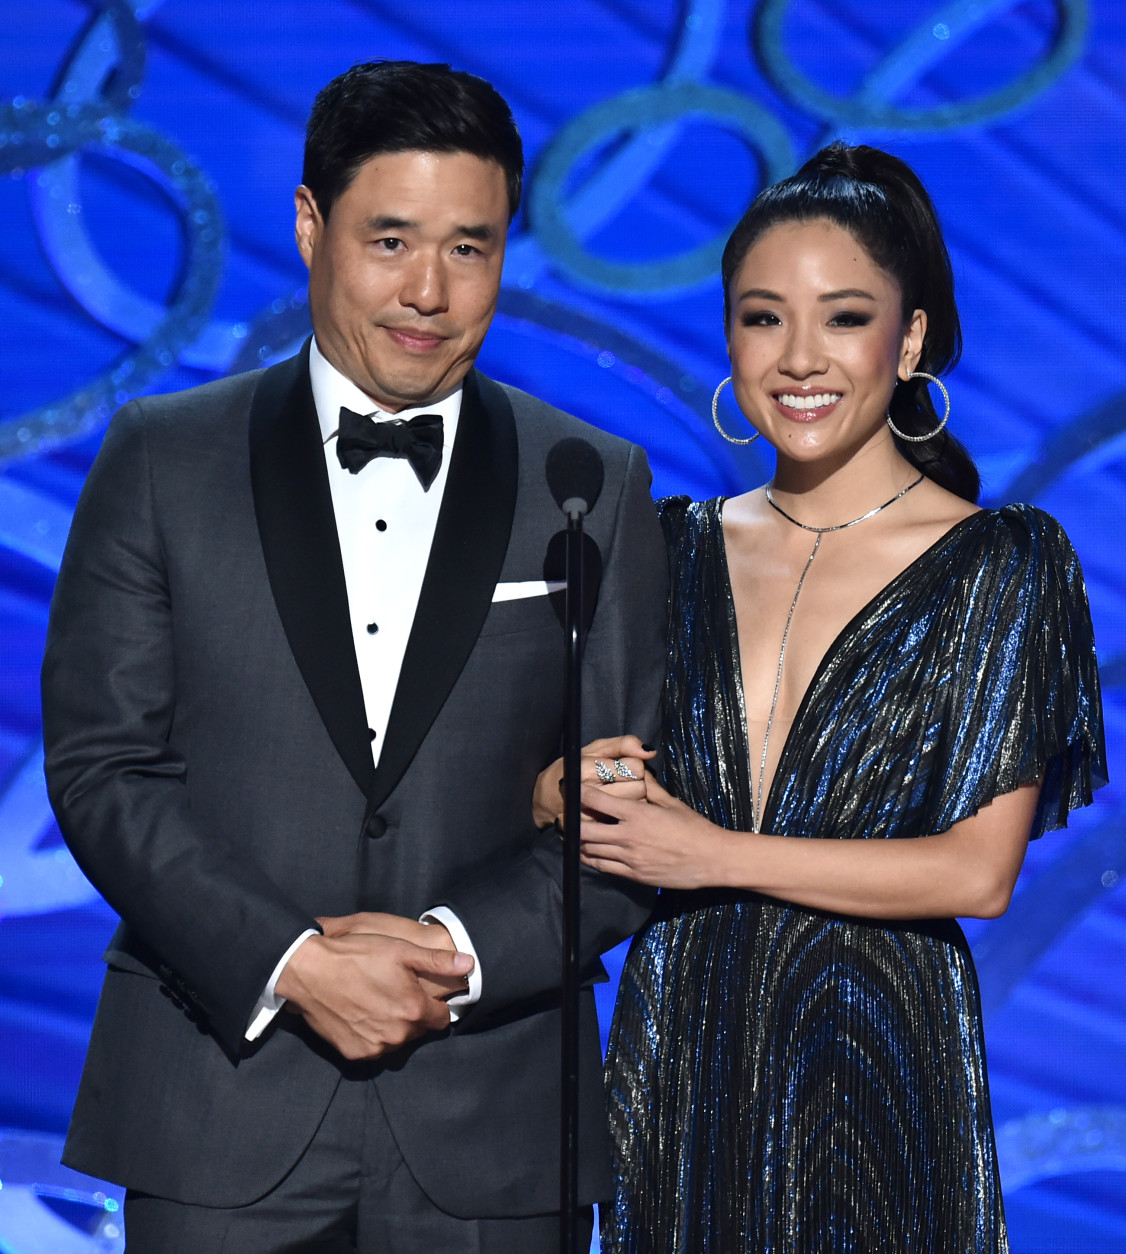 Randall Park, left, and Constance Wu speak at the 68th Primetime Emmy Awards on Sunday, Sept. 18, 2016, at the Microsoft Theater in Los Angeles. (Photo by Vince Bucci/Invision for the Television Academy/AP Images)